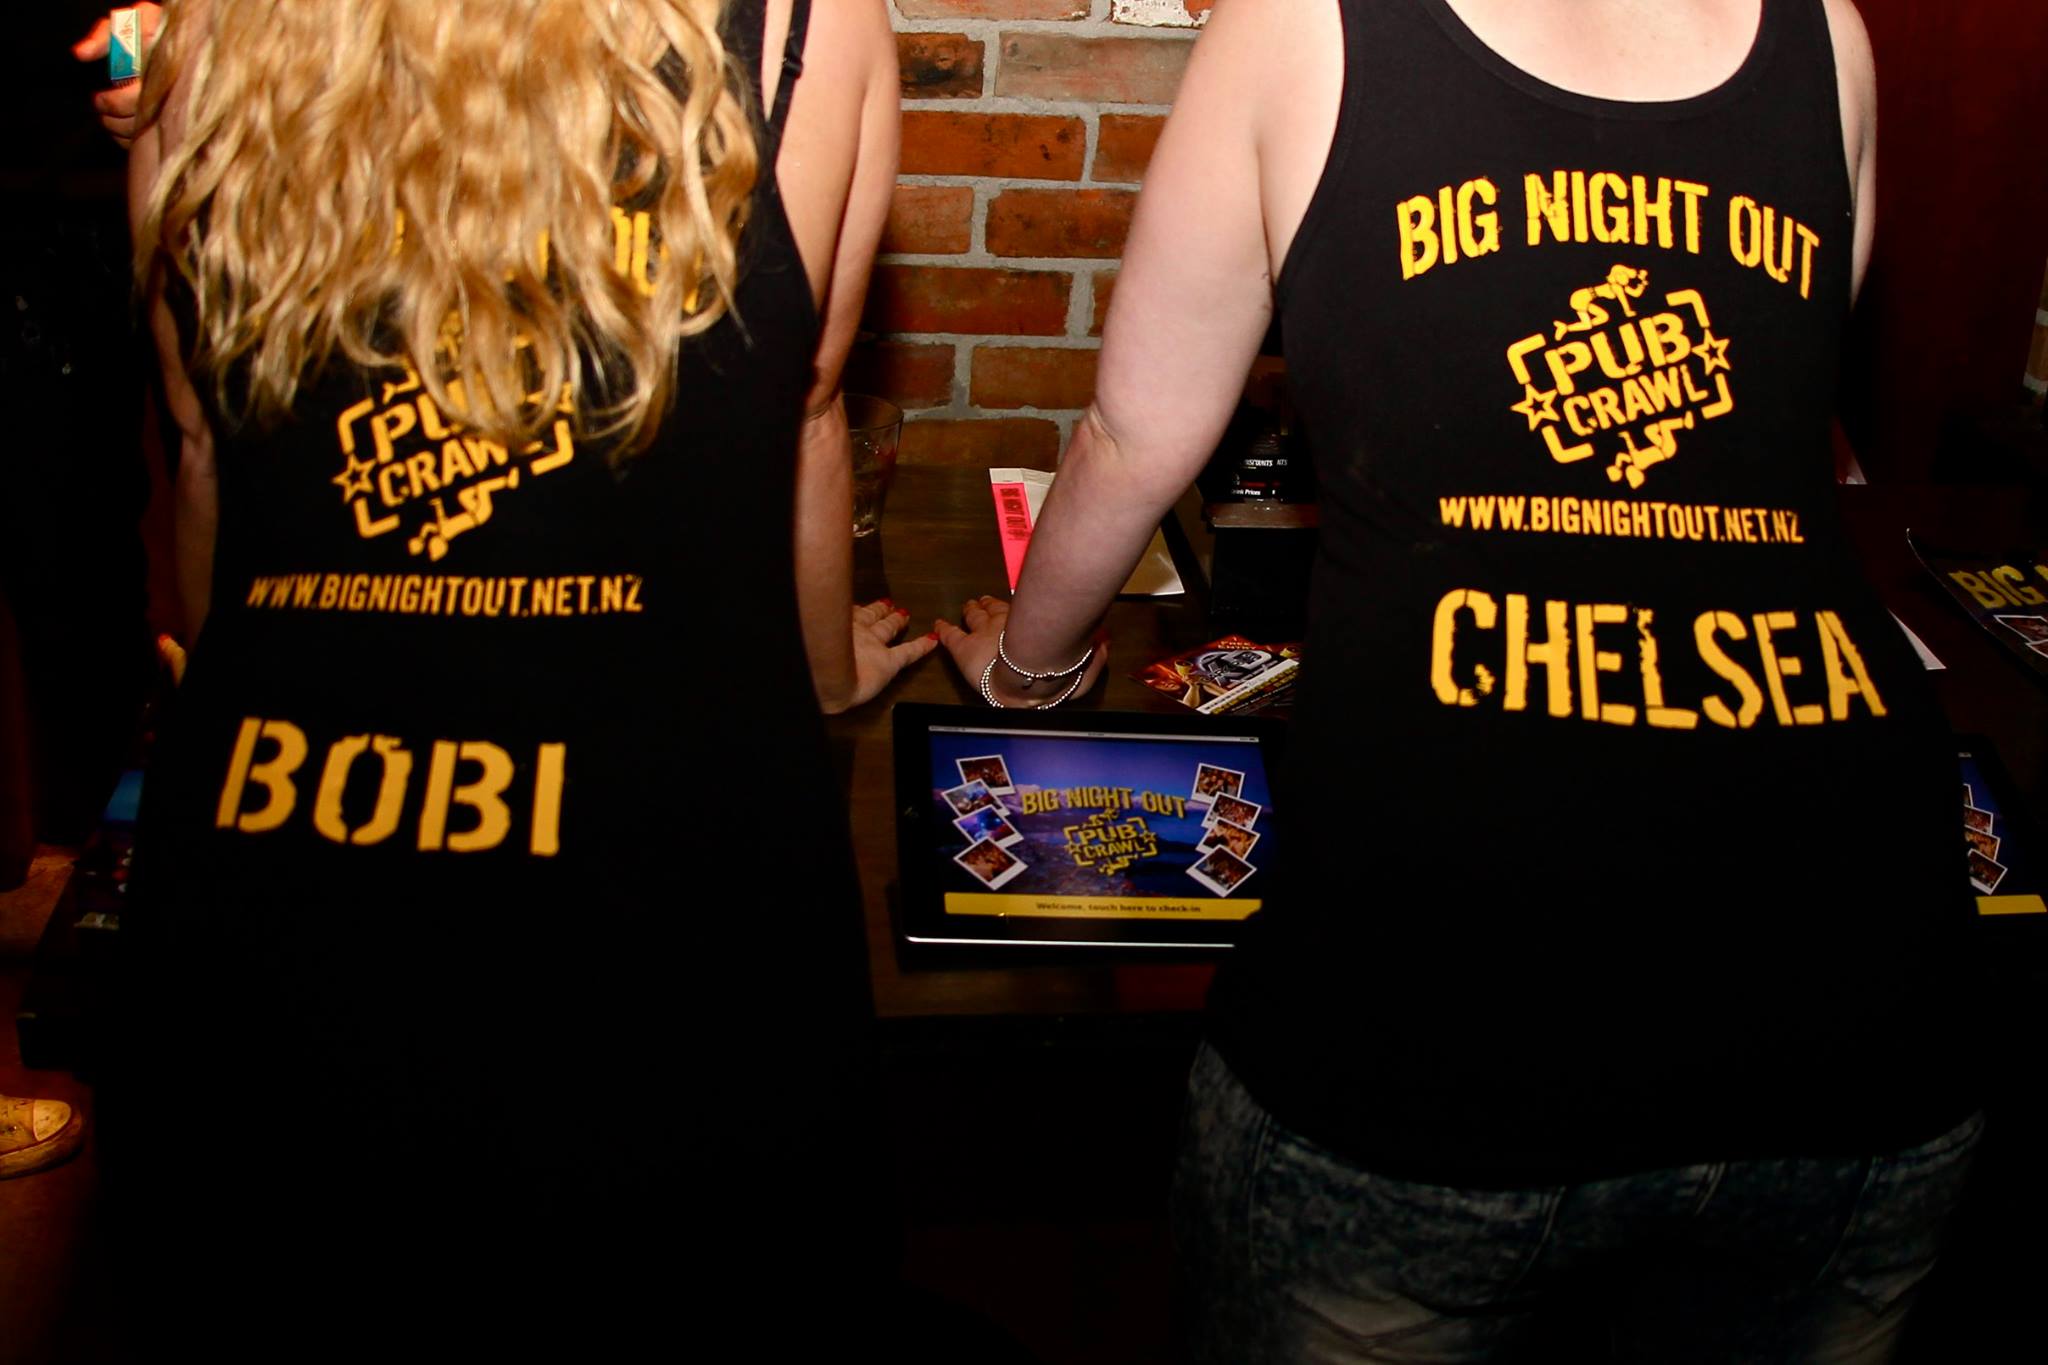 Bobi and Chelsea crazy Big Night Out party crew shirts with nicknames